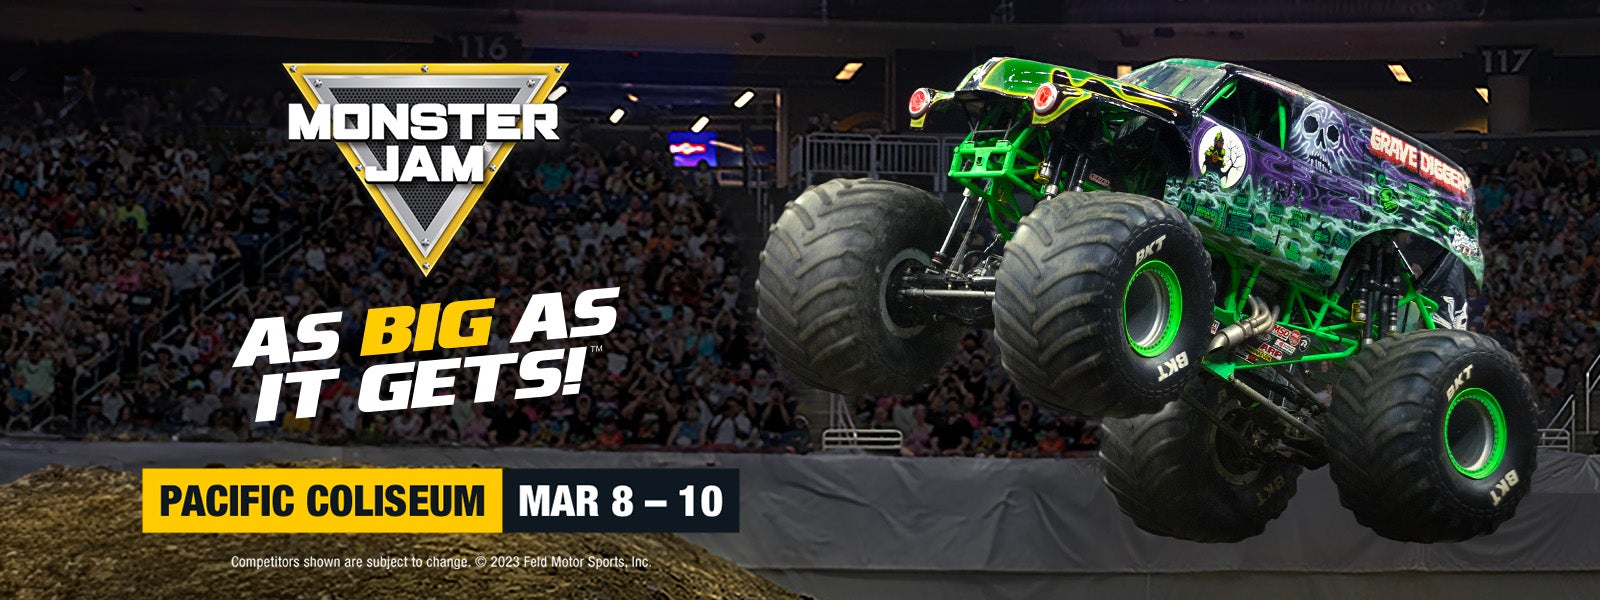 Monster Jam' trucks ready to roll in Vancouver after 3-year